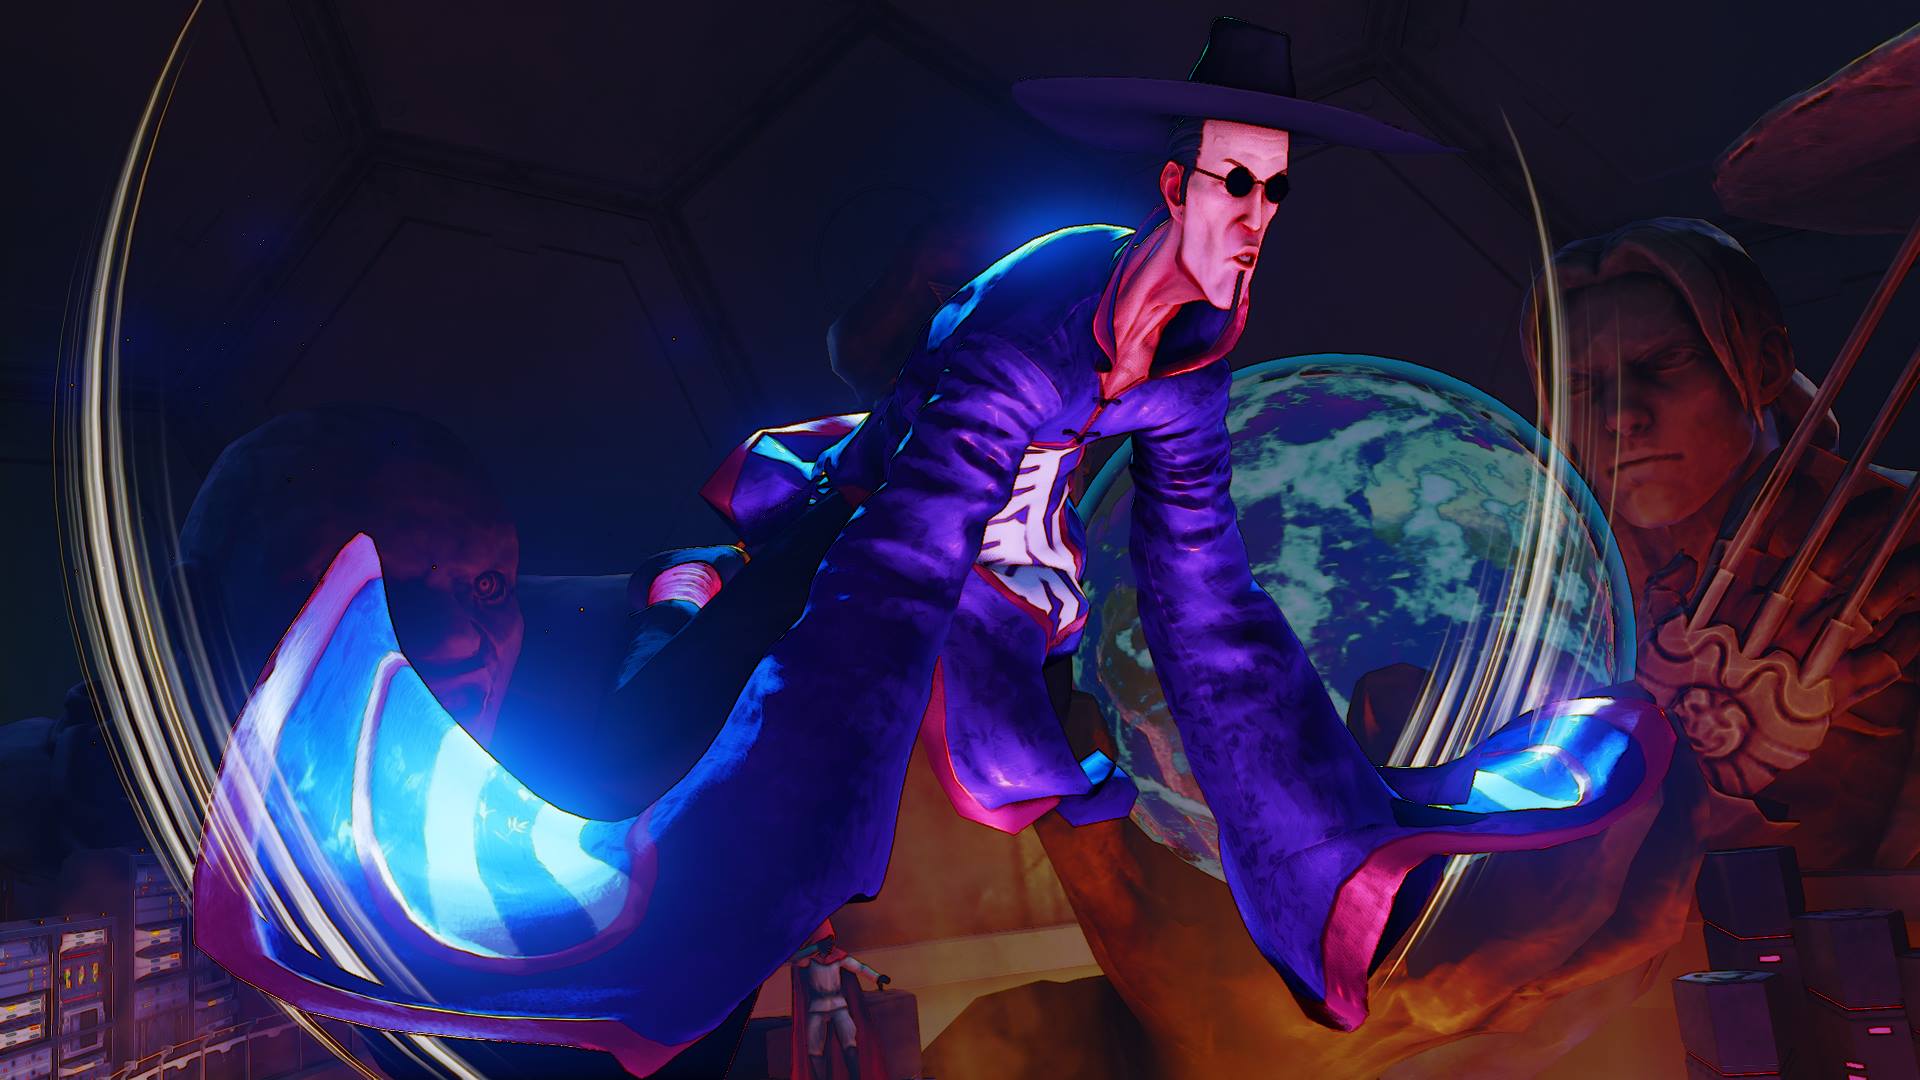 Necalli and Vega's moves Street Fighter 5 1 out of 2 image gallery